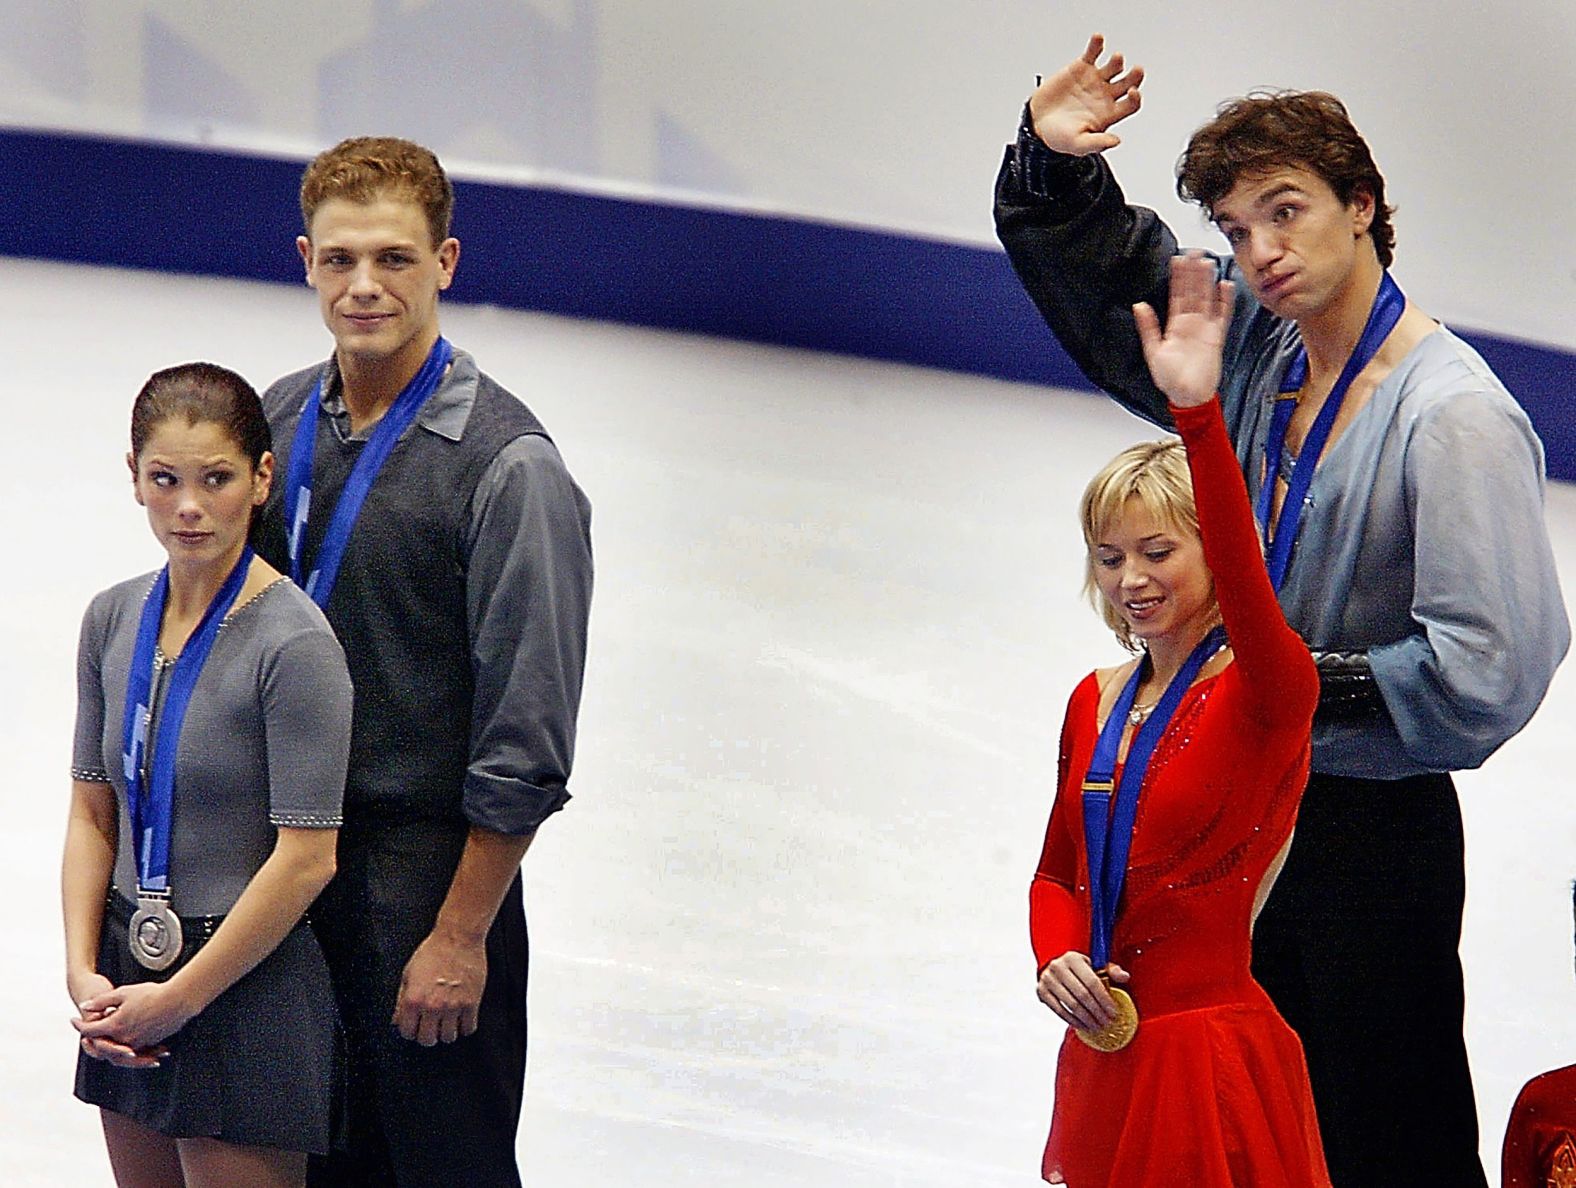 Canadian figure skaters Jamie Salé and David Pelletier were at the center of an infamous Olympic scoring scandal in 2002. Many thought they had done enough to win the gold medal after a tremendous performance, but the gold instead went to the Russian pair of Elena Berezhnaya and Anton Sikharulidze. An investigation later looked into whether French judge Marie-Reine Le Gougne had been pressured to give the gold to the Russians. Her score was thrown out, and the International Olympic Committee also gave golds to Salé and Pelletier. The scandal eventually led to a new scoring system in figure skating.